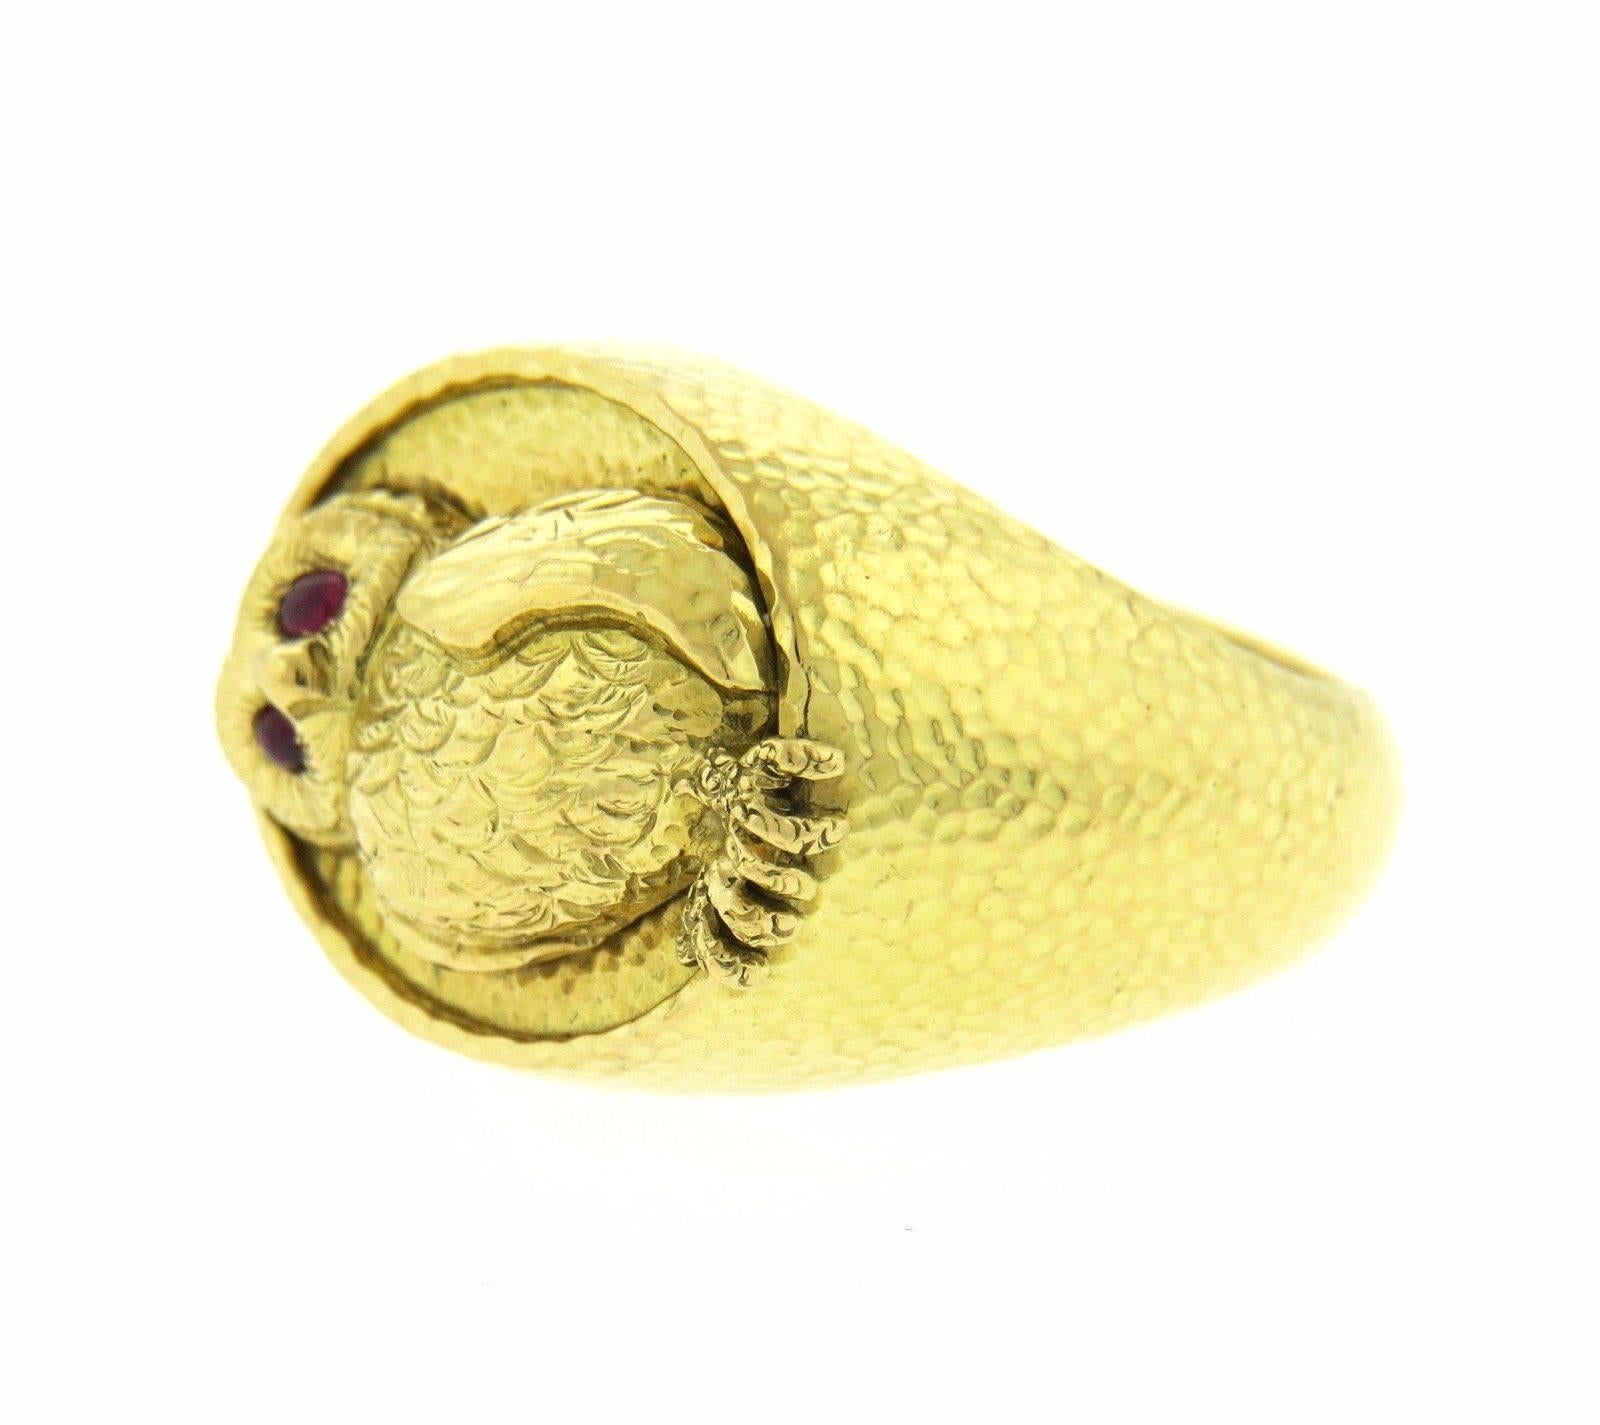 An 18k yellow gold ring set with rubies.  Crafted by David Webb, the ring is a size 6.25, top measures 15.8mm at widest point.  Marked: Webb 18K.  The weight of the ring is 15.5 grams.